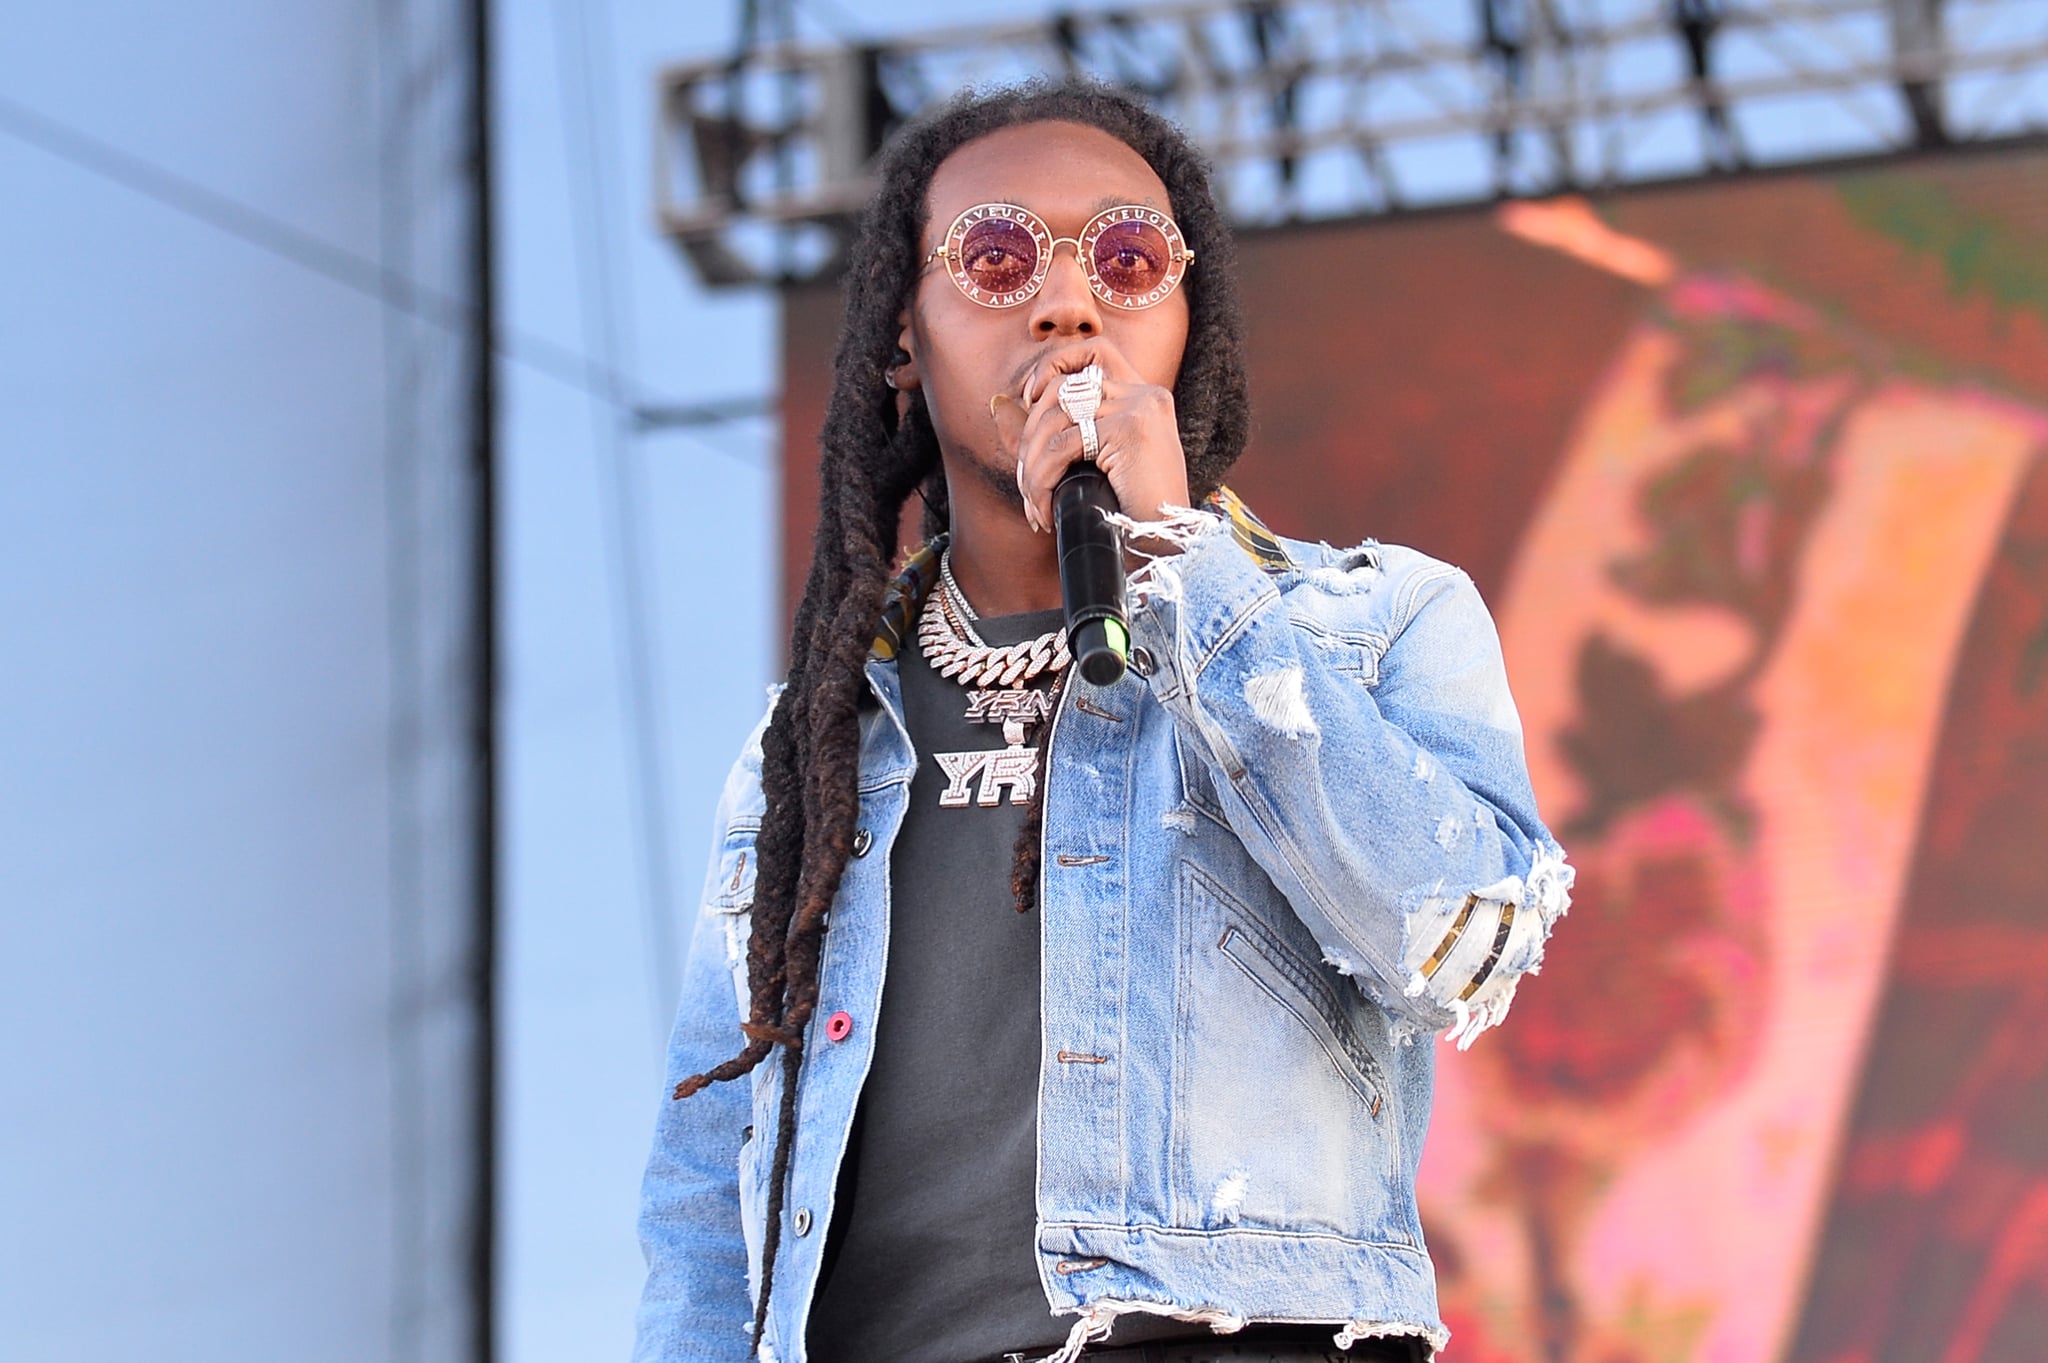 LAS VEGAS, NV - SEPTEMBER 23: Takeoff of Migos performs onstage during the Daytime Village Presented by Capital One at the 2017 HeartRadio Music Festival at the Las Vegas Village on September 23, 2017 in Las Vegas, Nevada.  (Photo by Bryan Steffy/Getty Images for iHeartMedia)